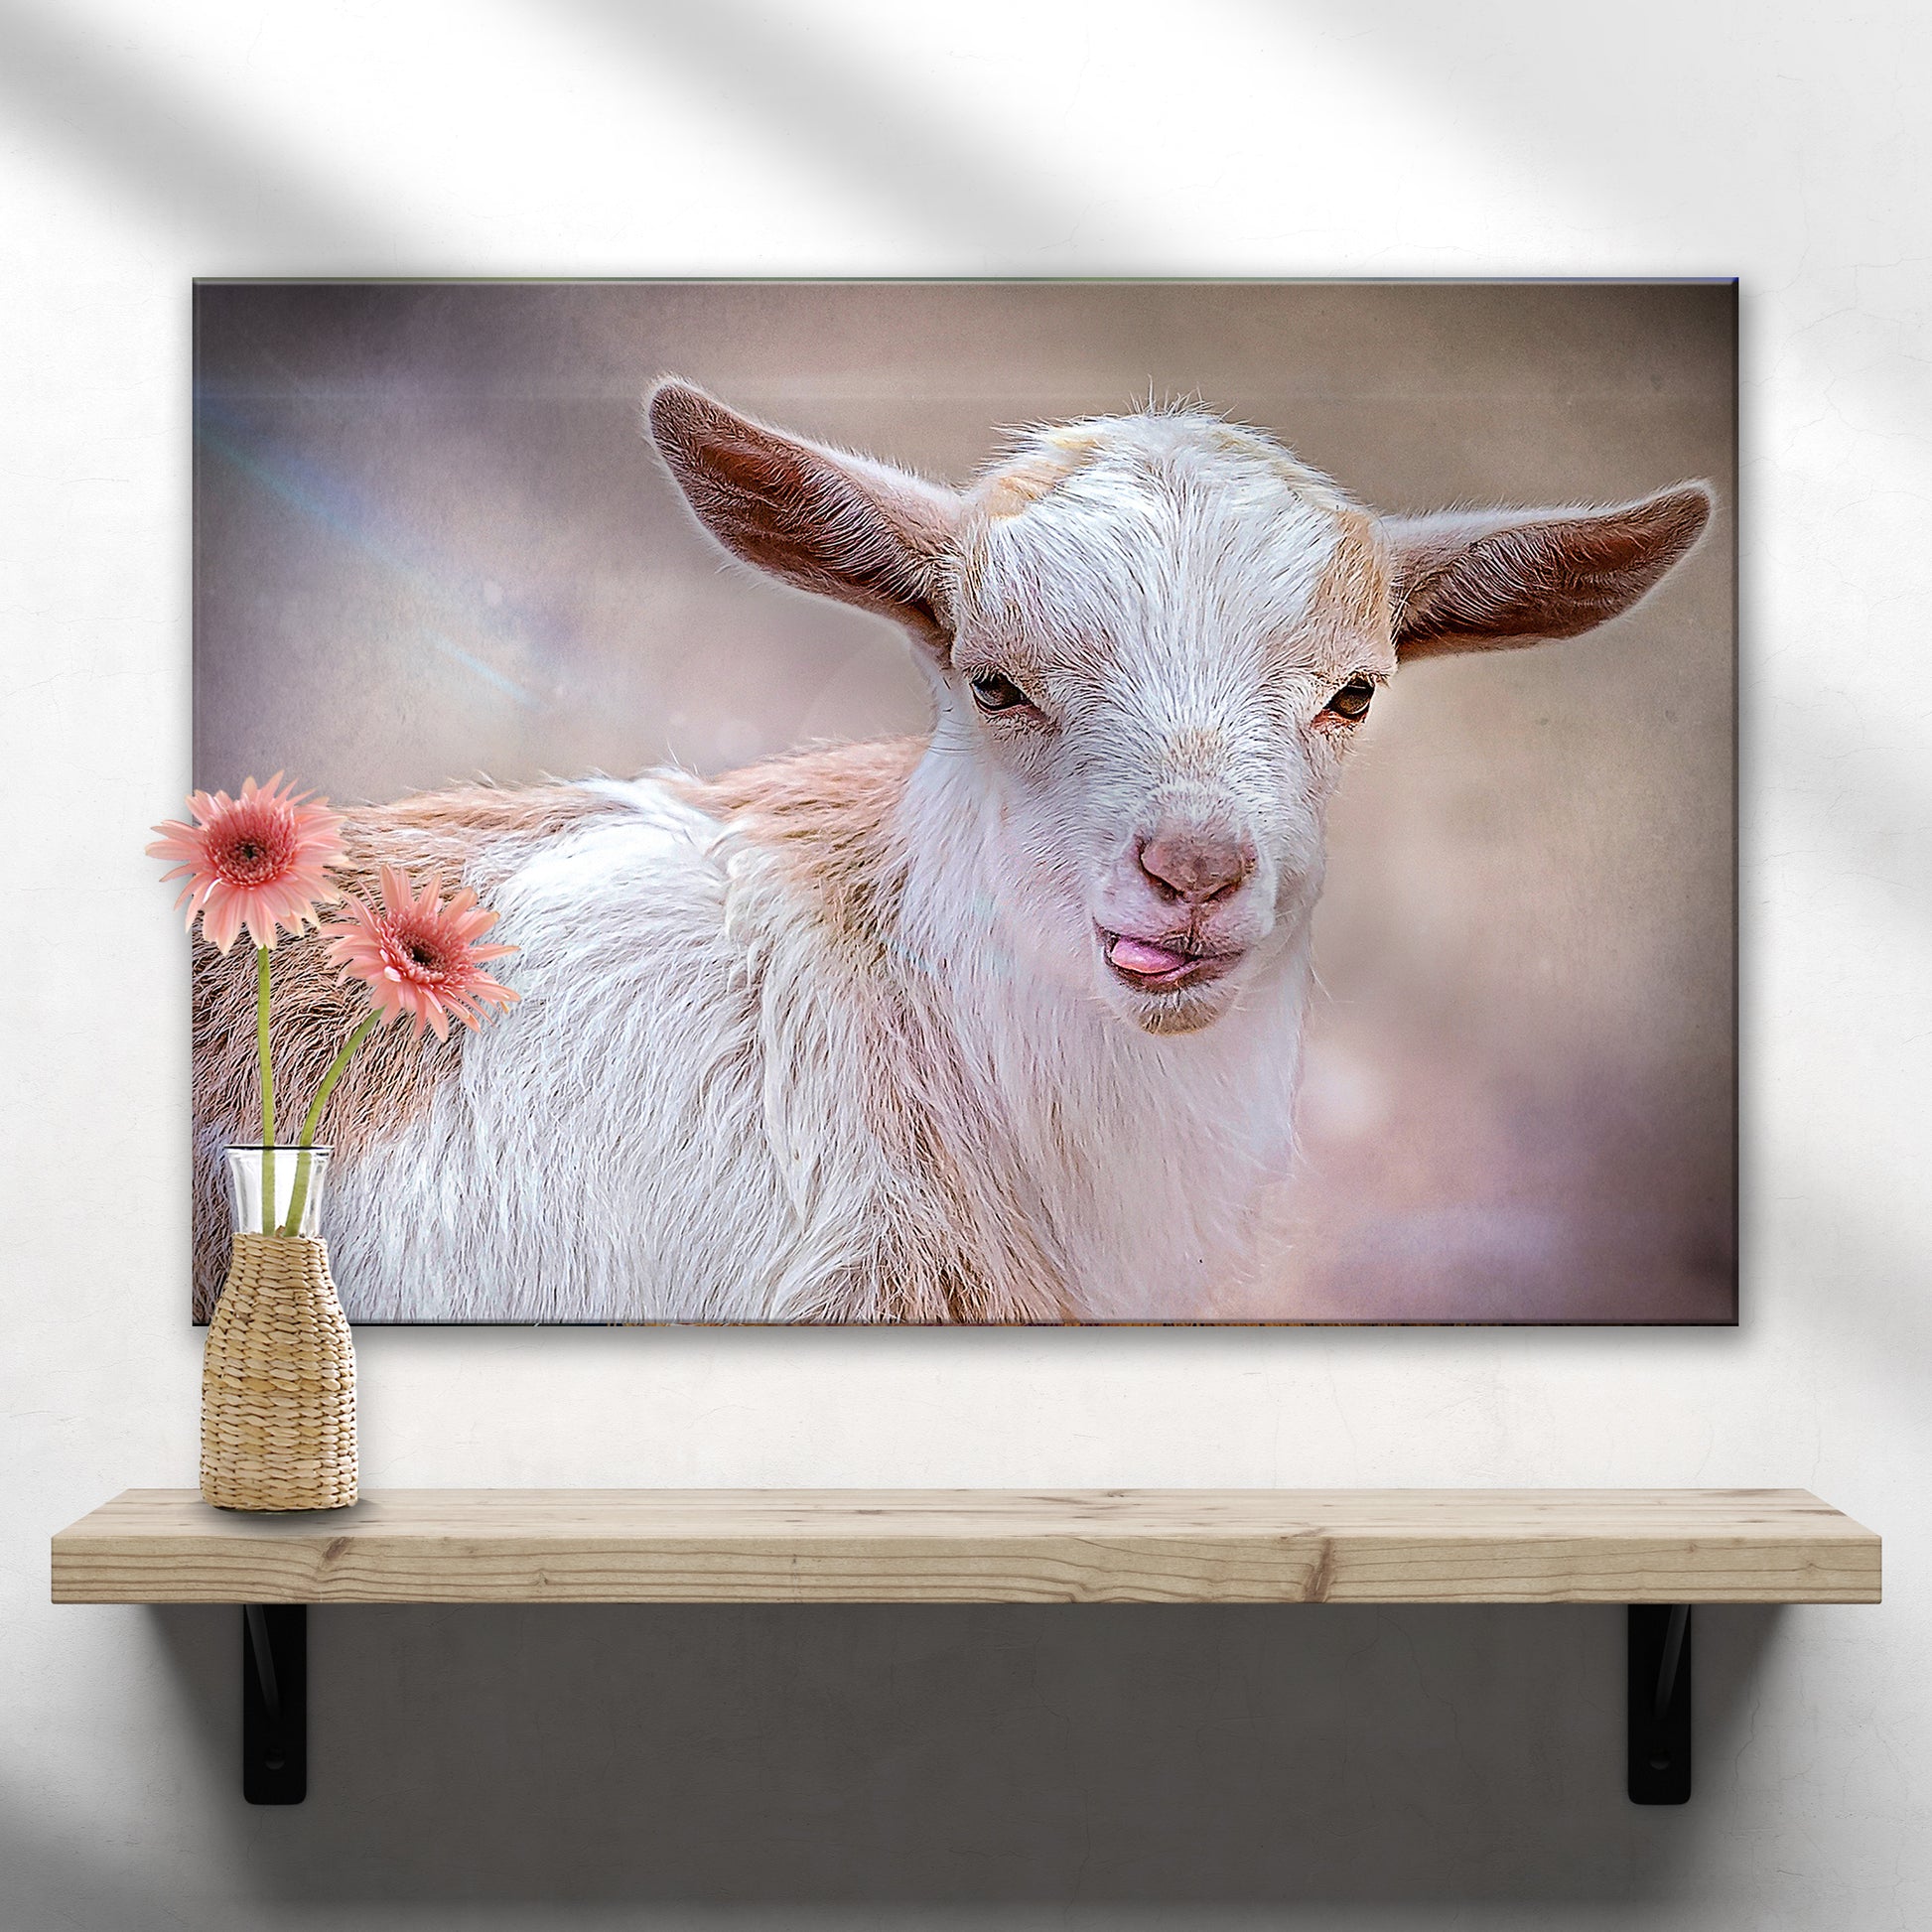 Cheeky Goat Canvas Wall Art - Image by Tailored Canvases